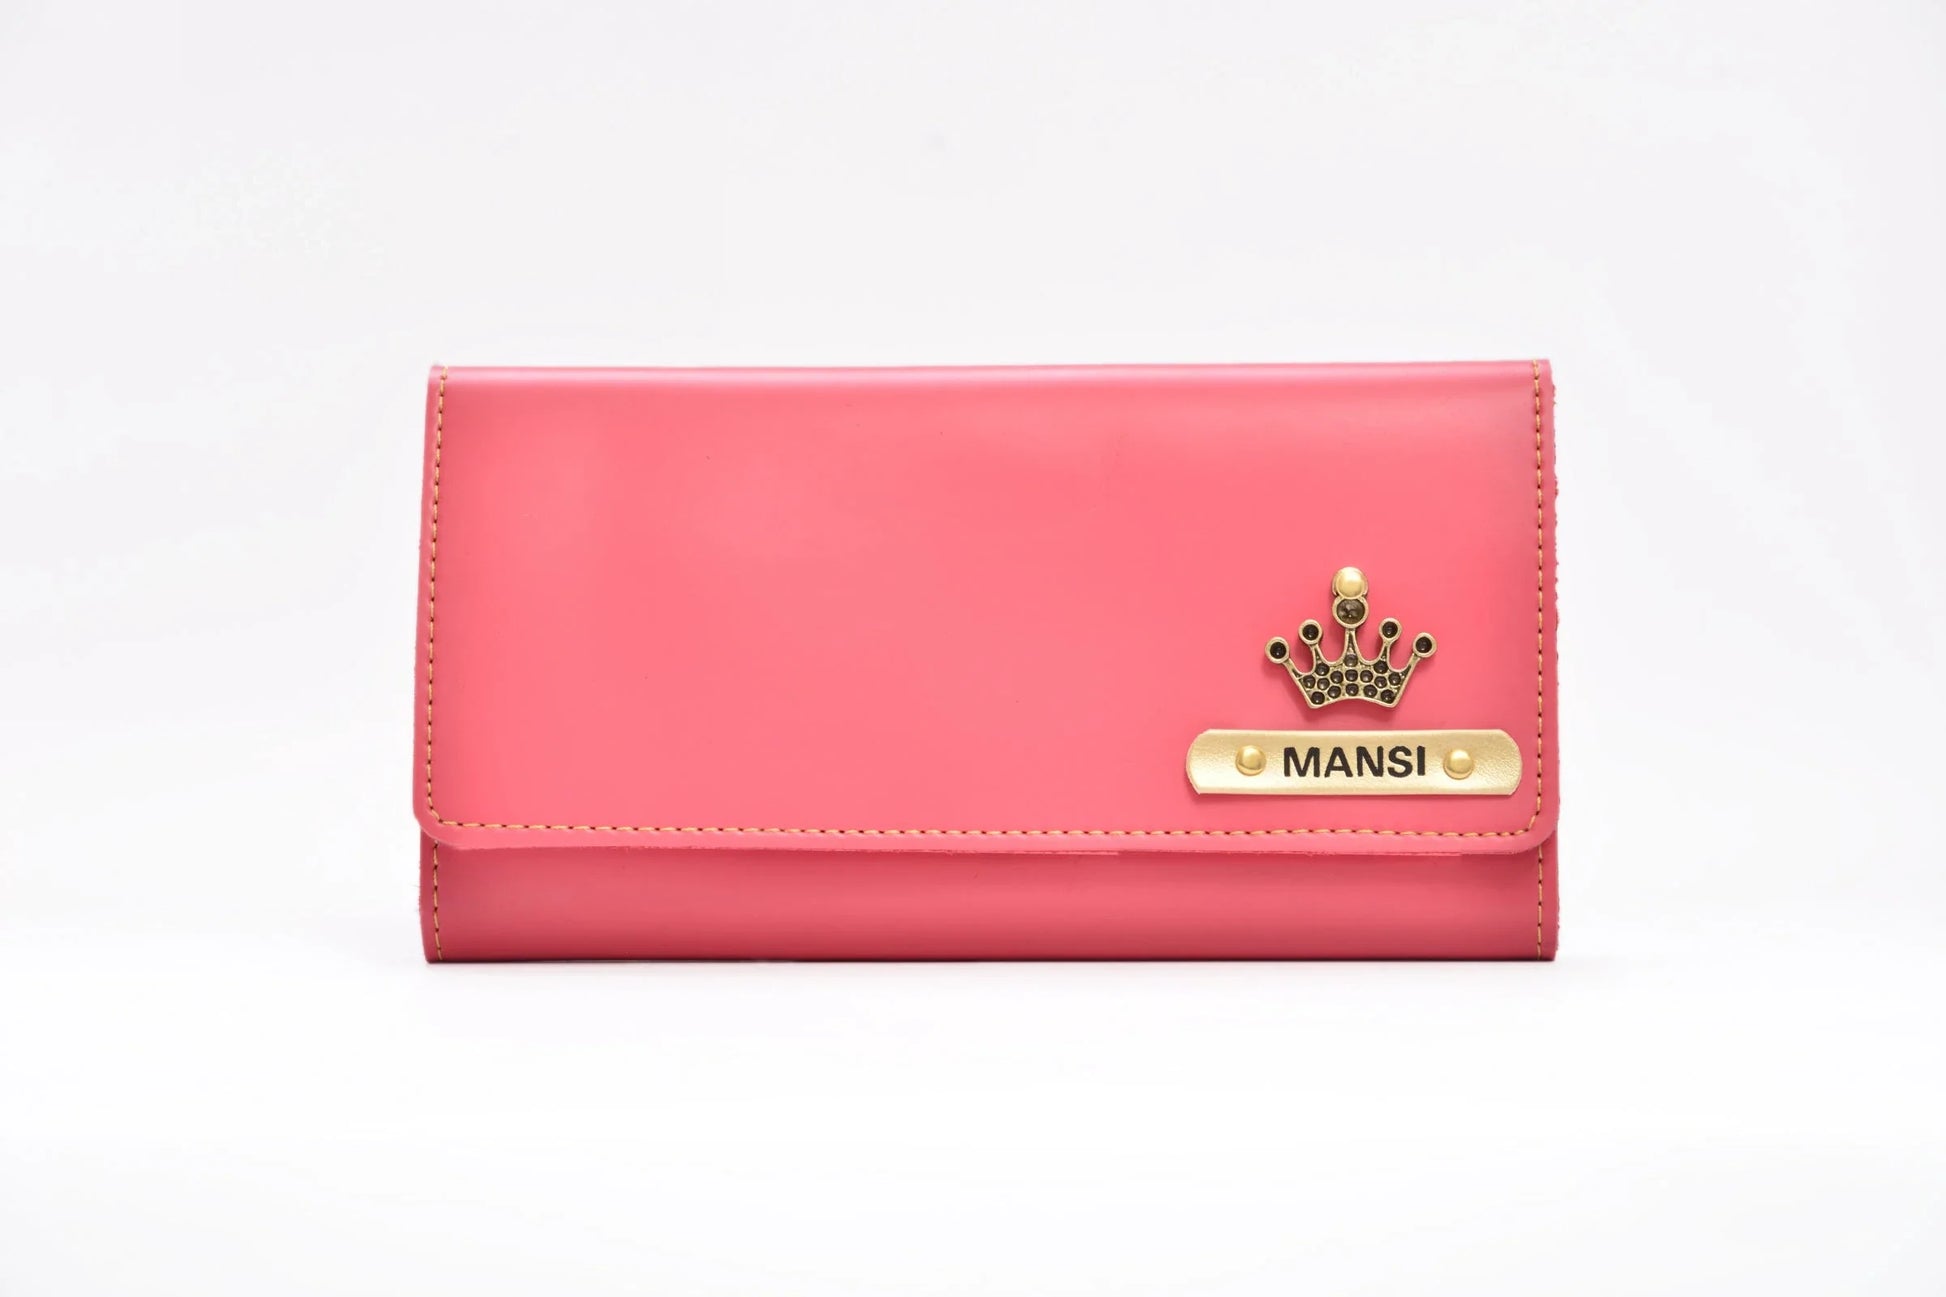 With features like multiple card slots and a zippered coin compartment, our wallets are both practical and chic.